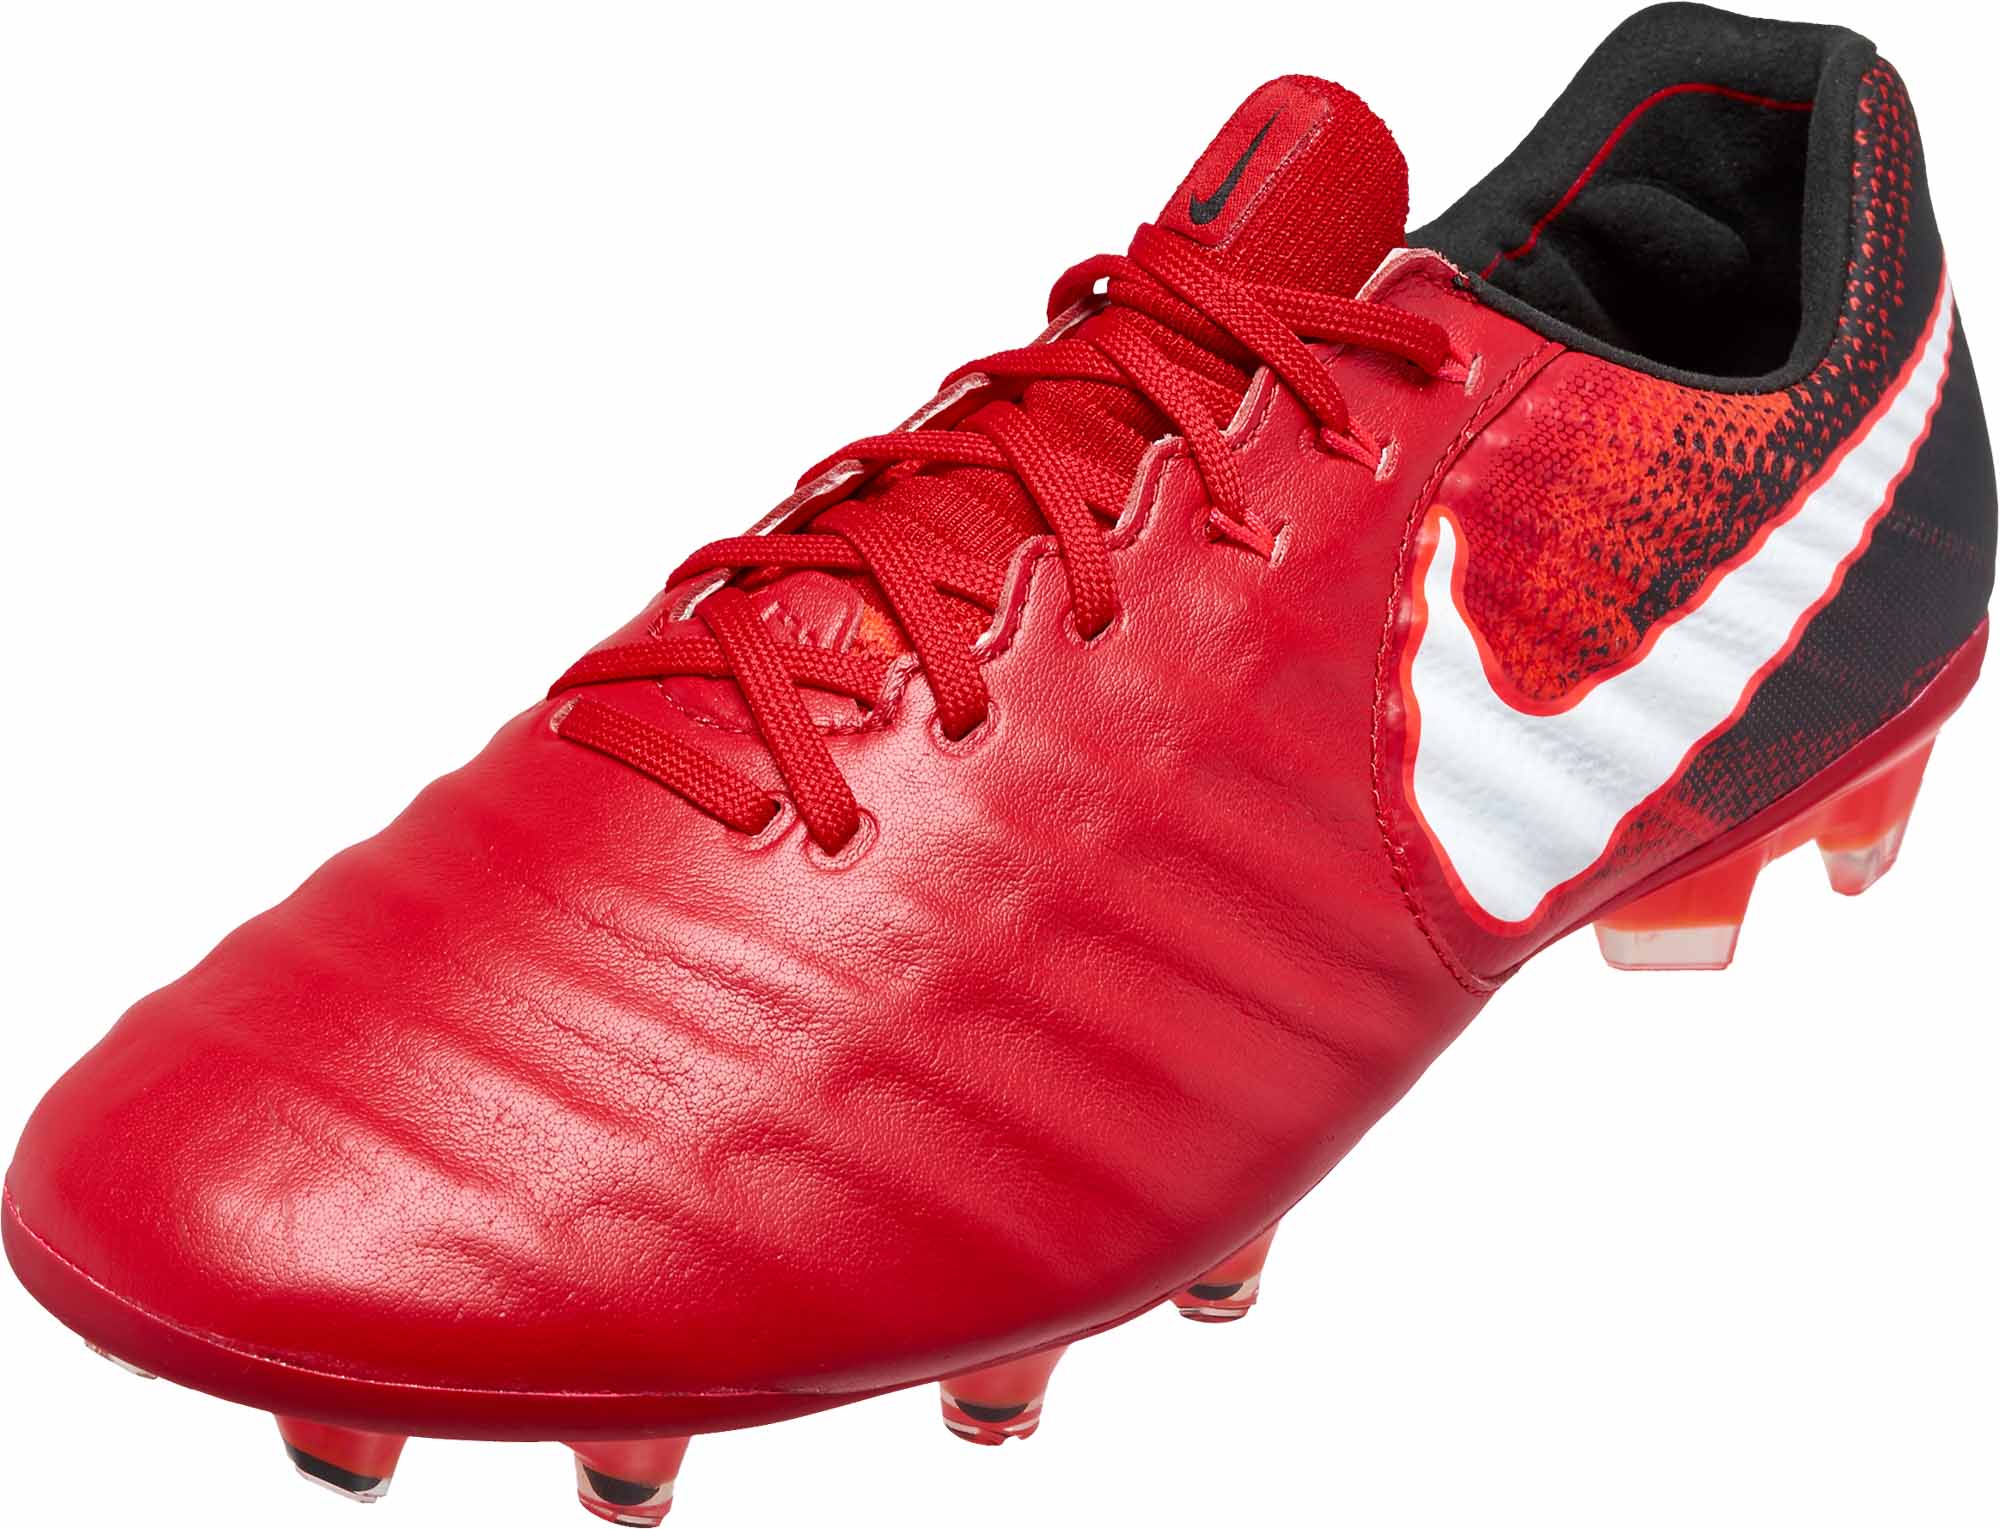 red and white tiempos